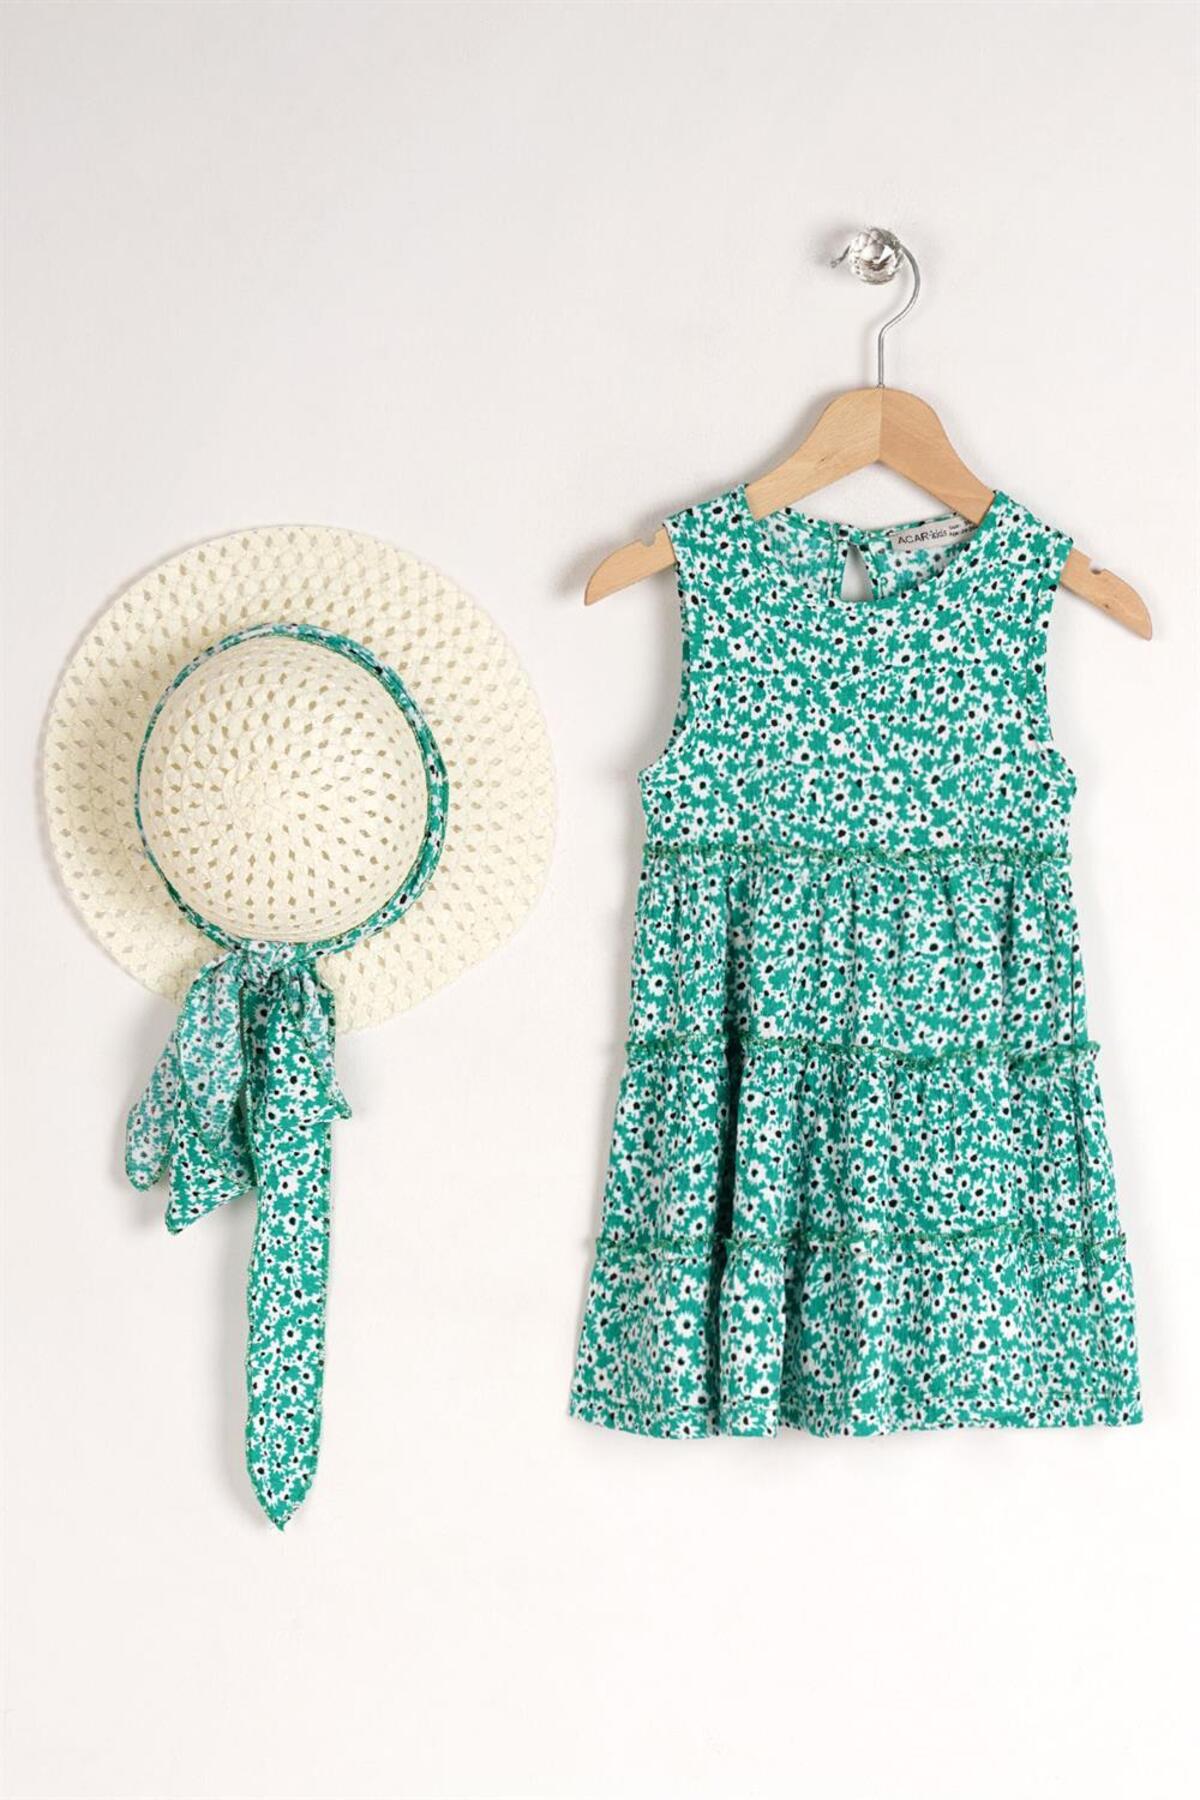 Girl Benetton Colorful Floral Patterned Dress With Hat Accessory